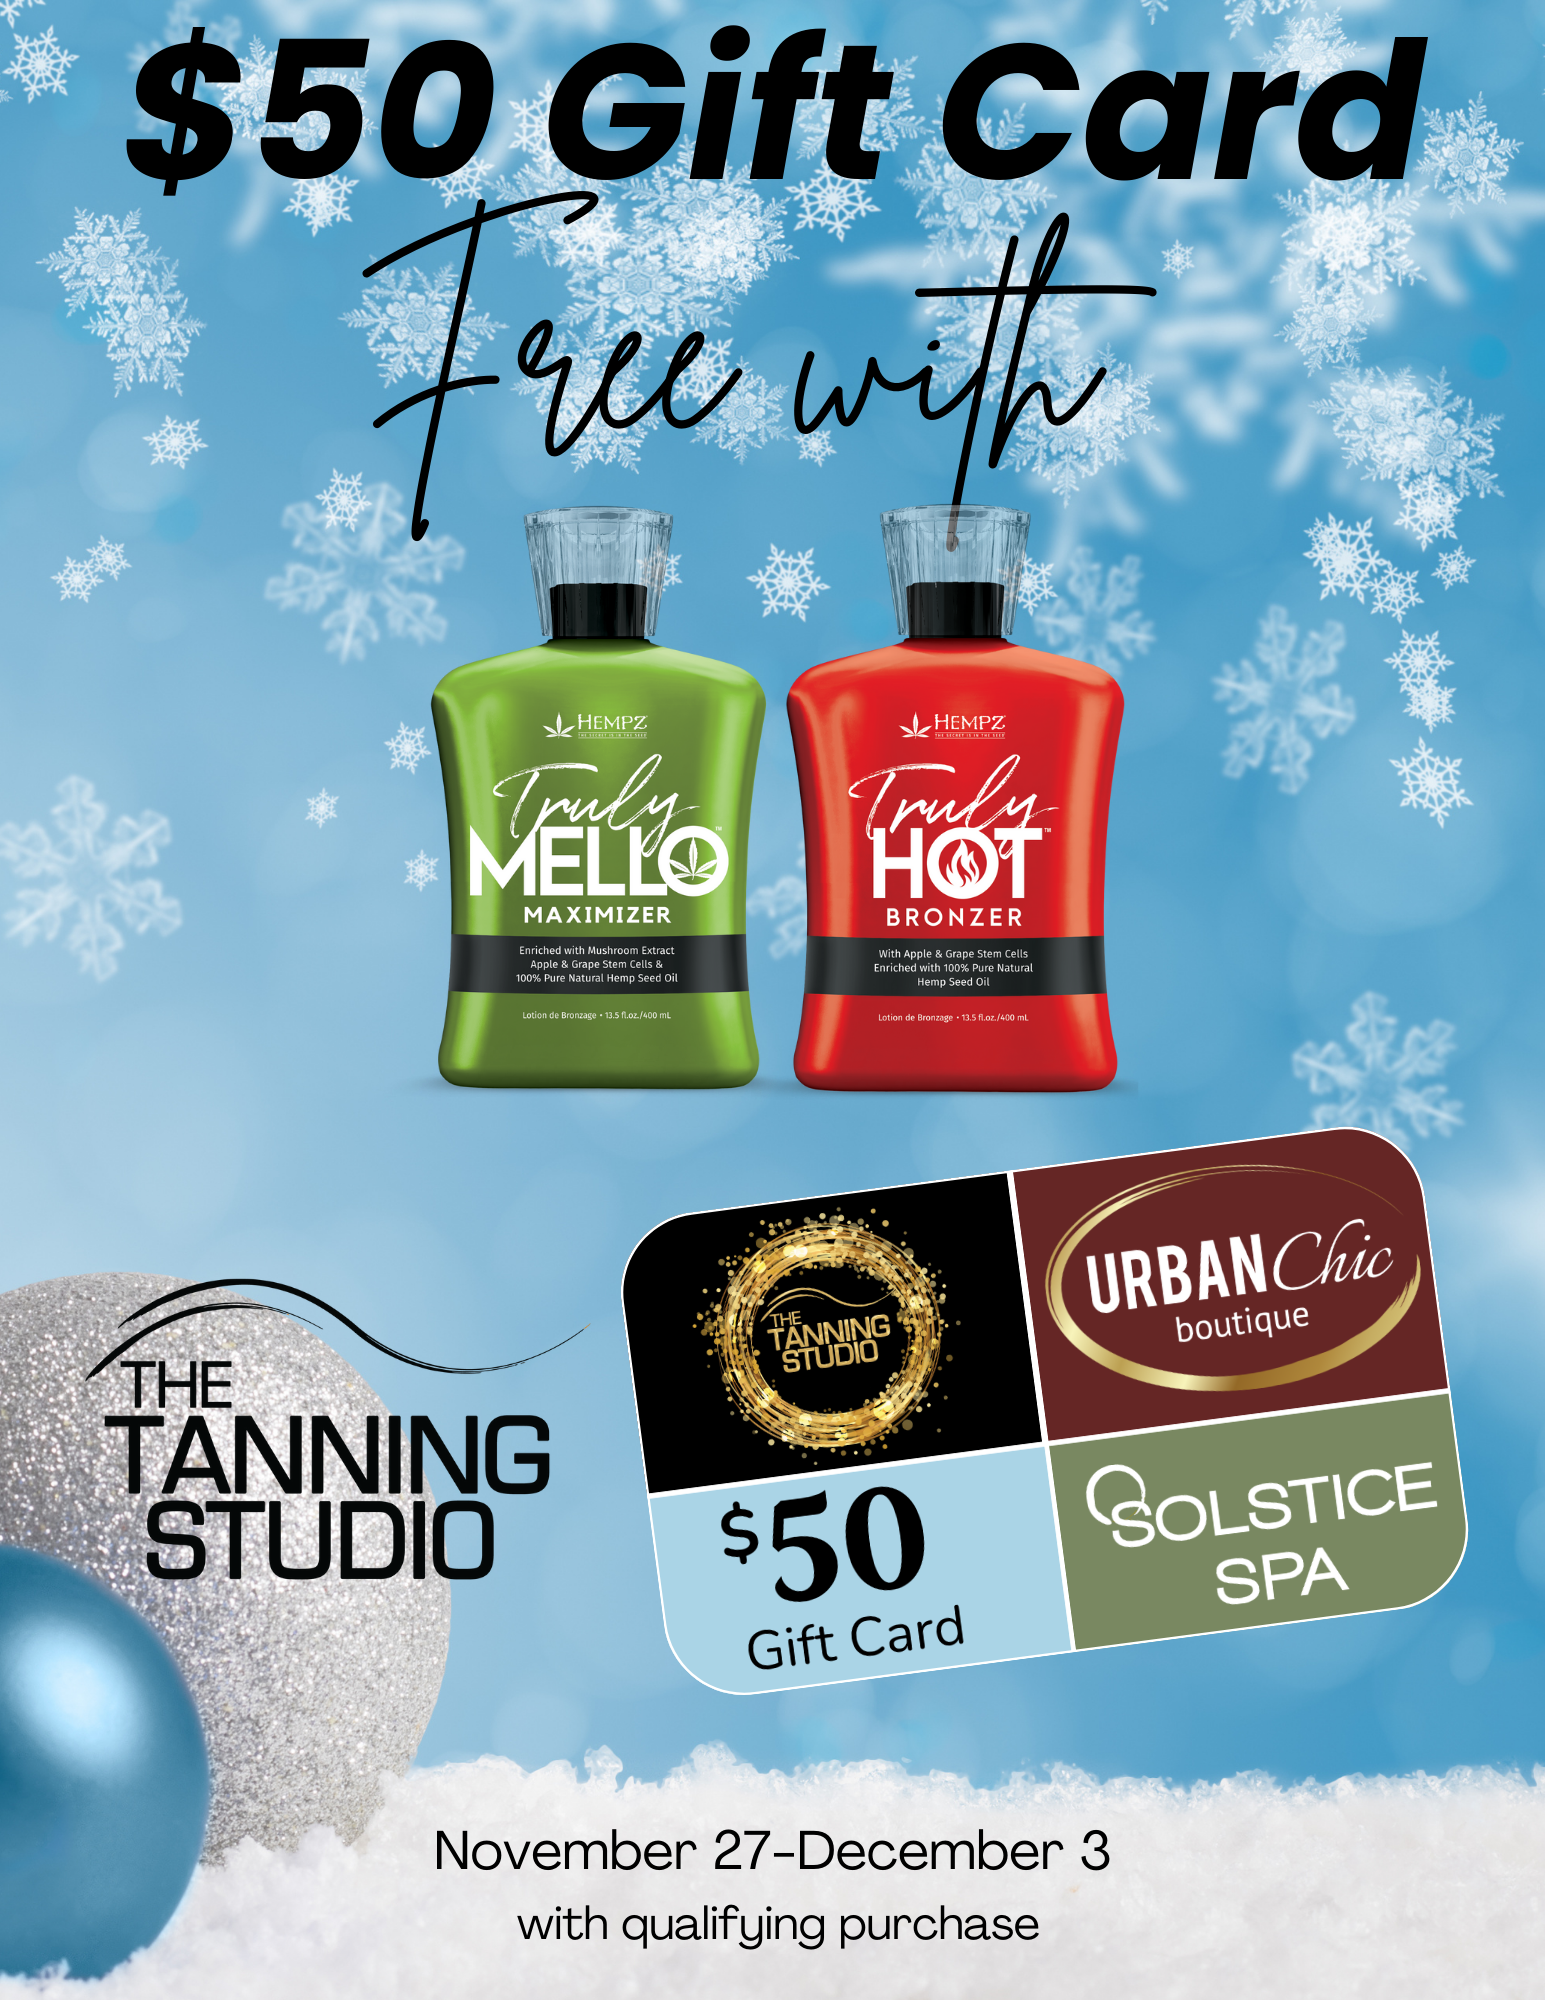 Get a $50 Gift Card with lotion purchase